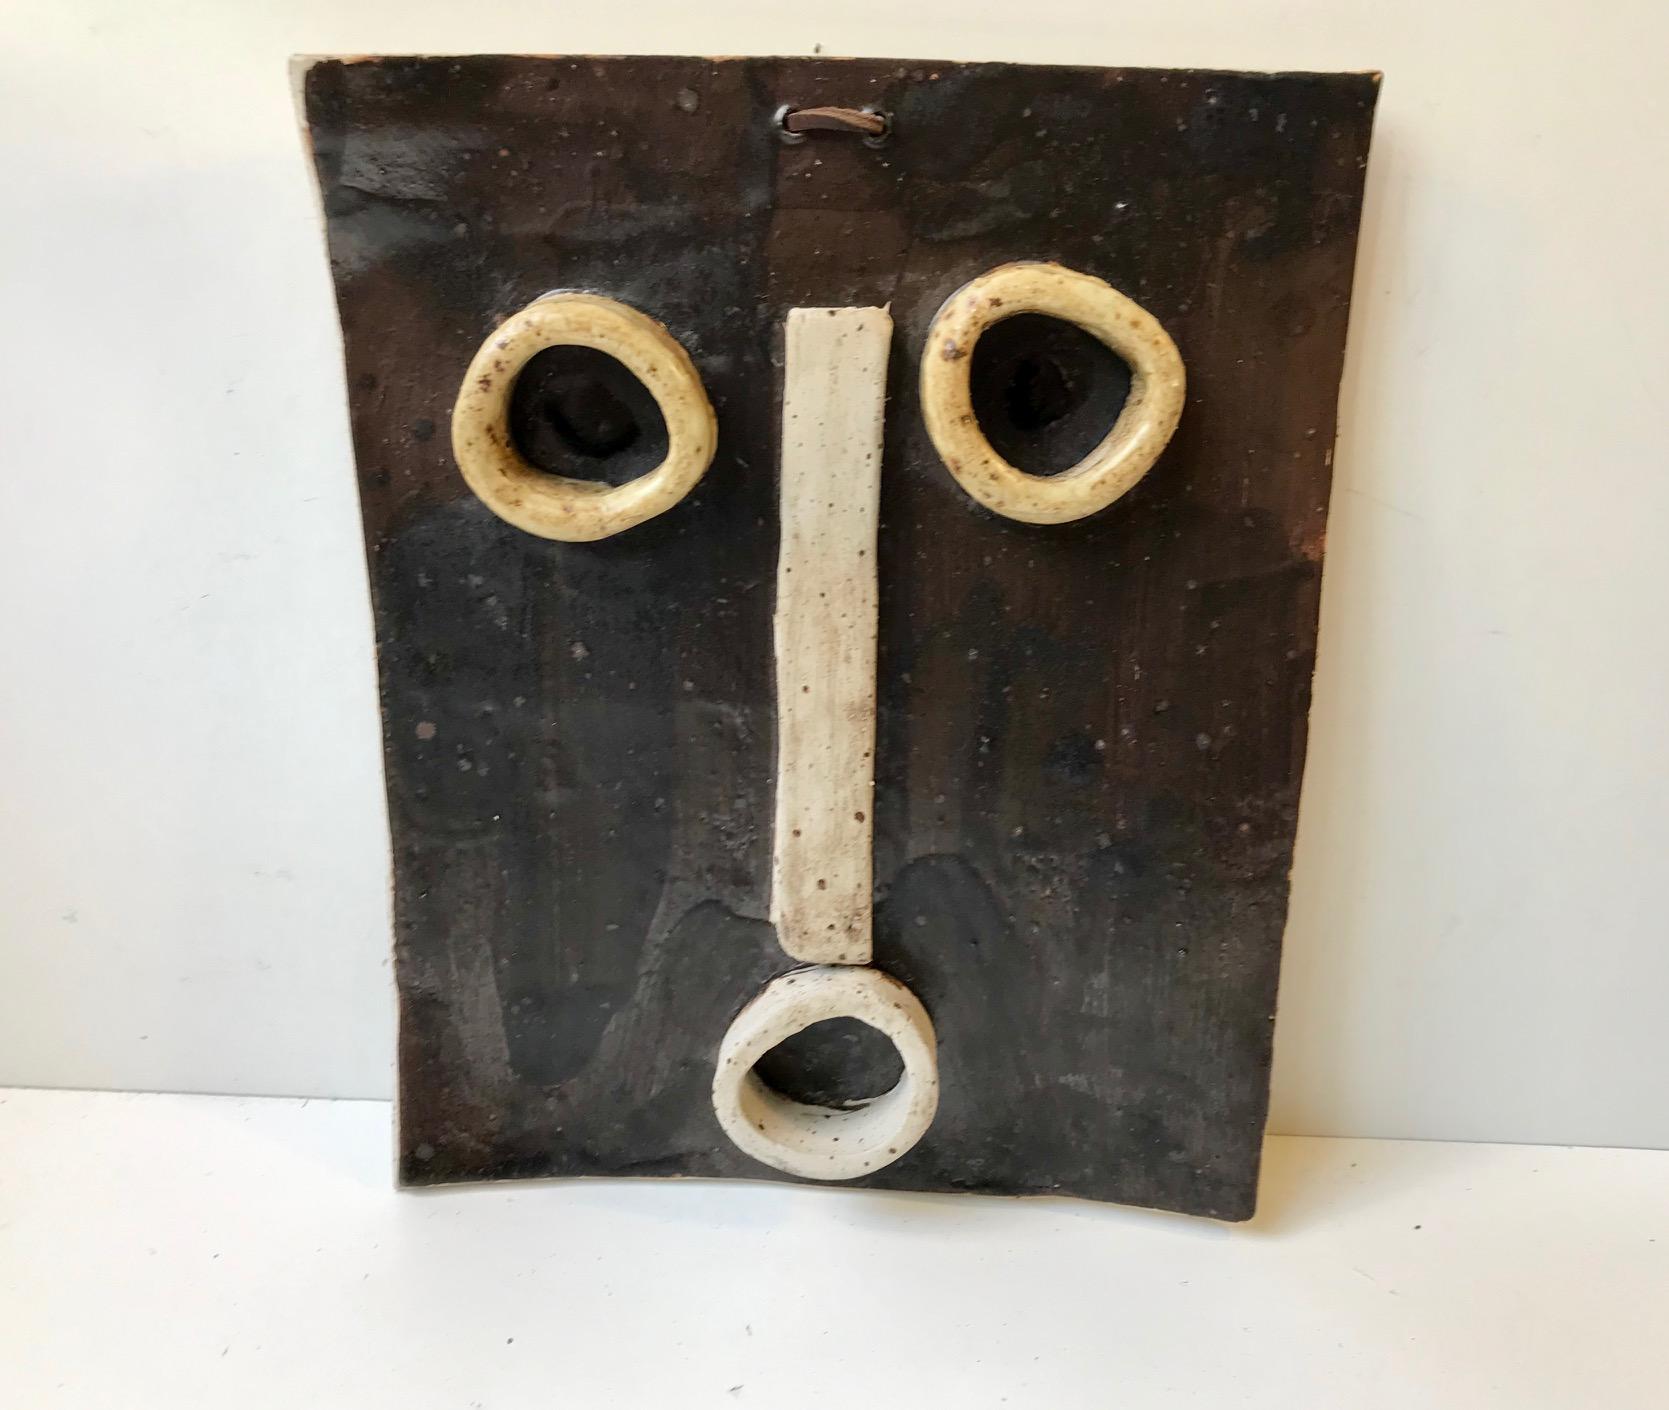 European Modernist Ceramic Wall Plaque in a Style Reminiscent of Pablo Picasso, 1970s